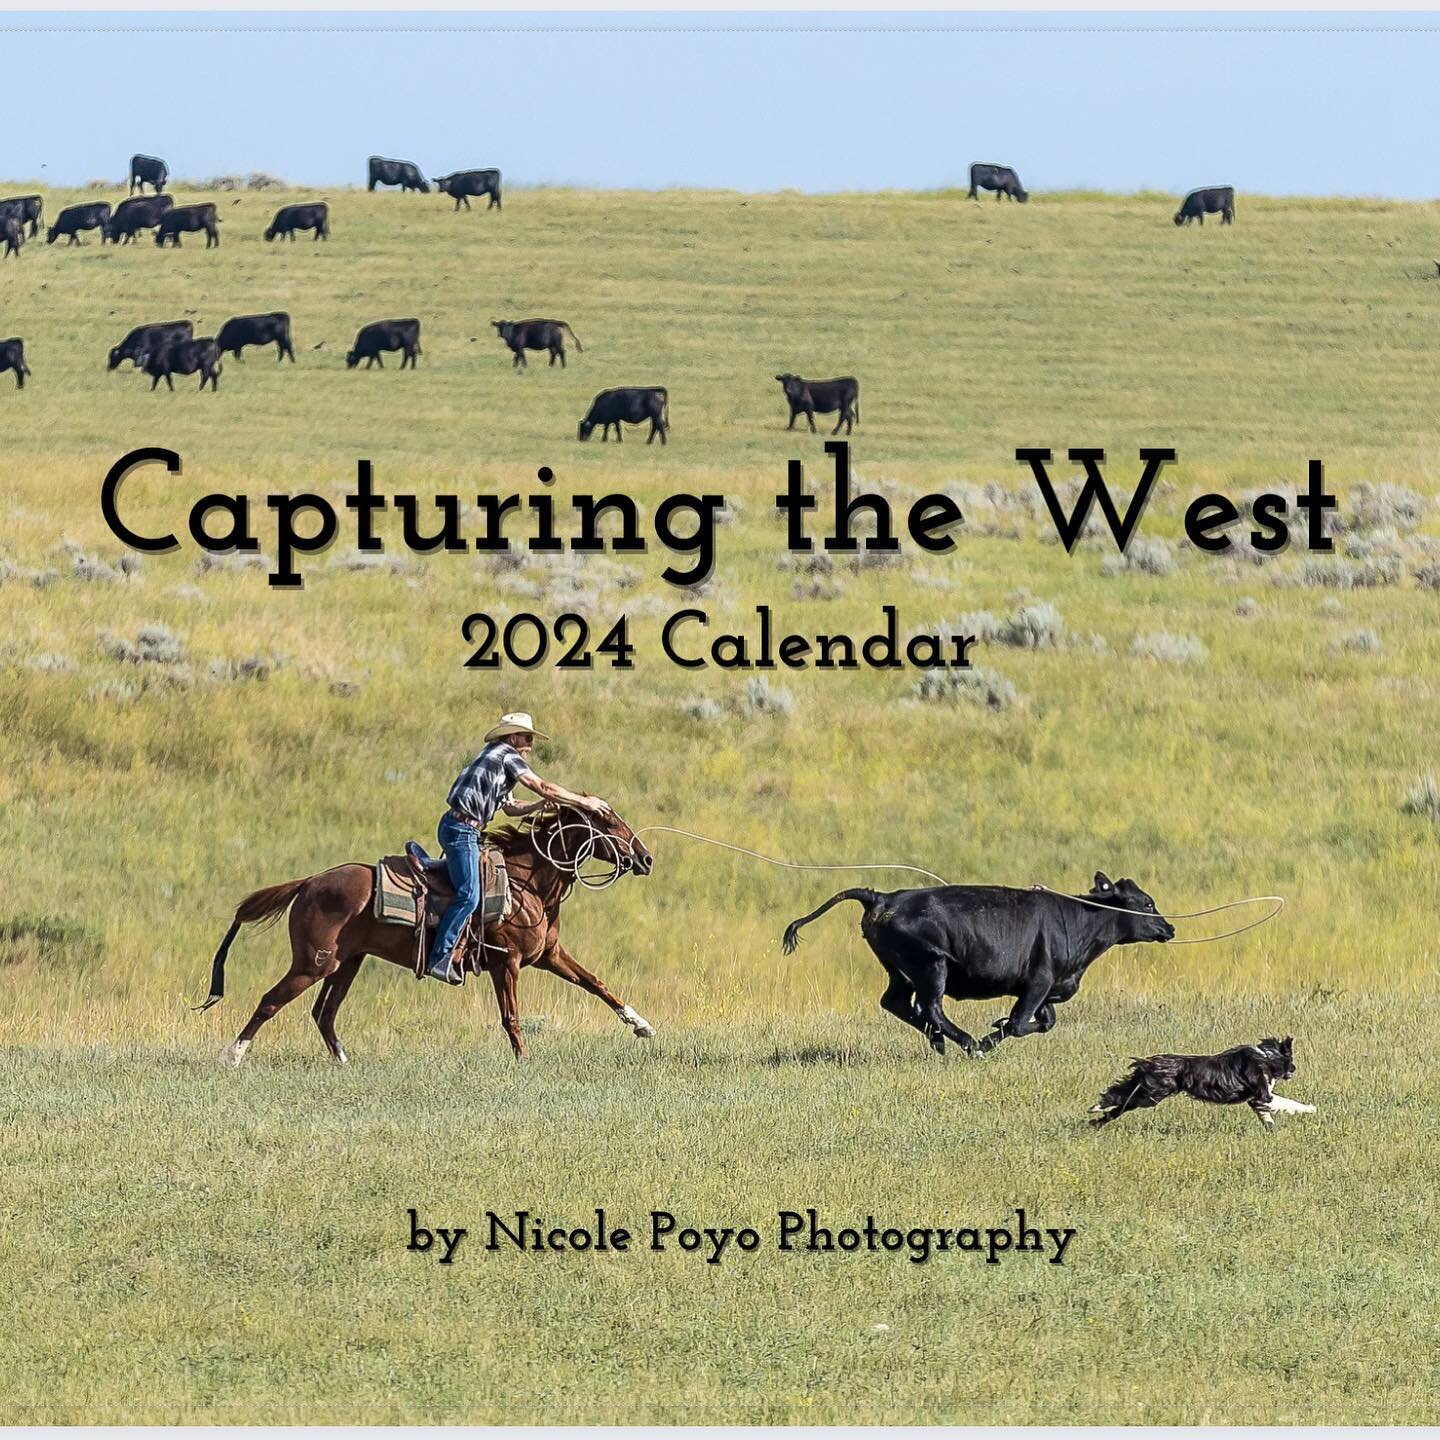 🛍️ Many of you requested a 12-month wall calendar, and I'm happy to offer a limited run of these for you!

&quot;Capturing the West&quot; features 13 beautiful images printed on a nice card stock and ready to hang up on the wall. 

Each calendar mea